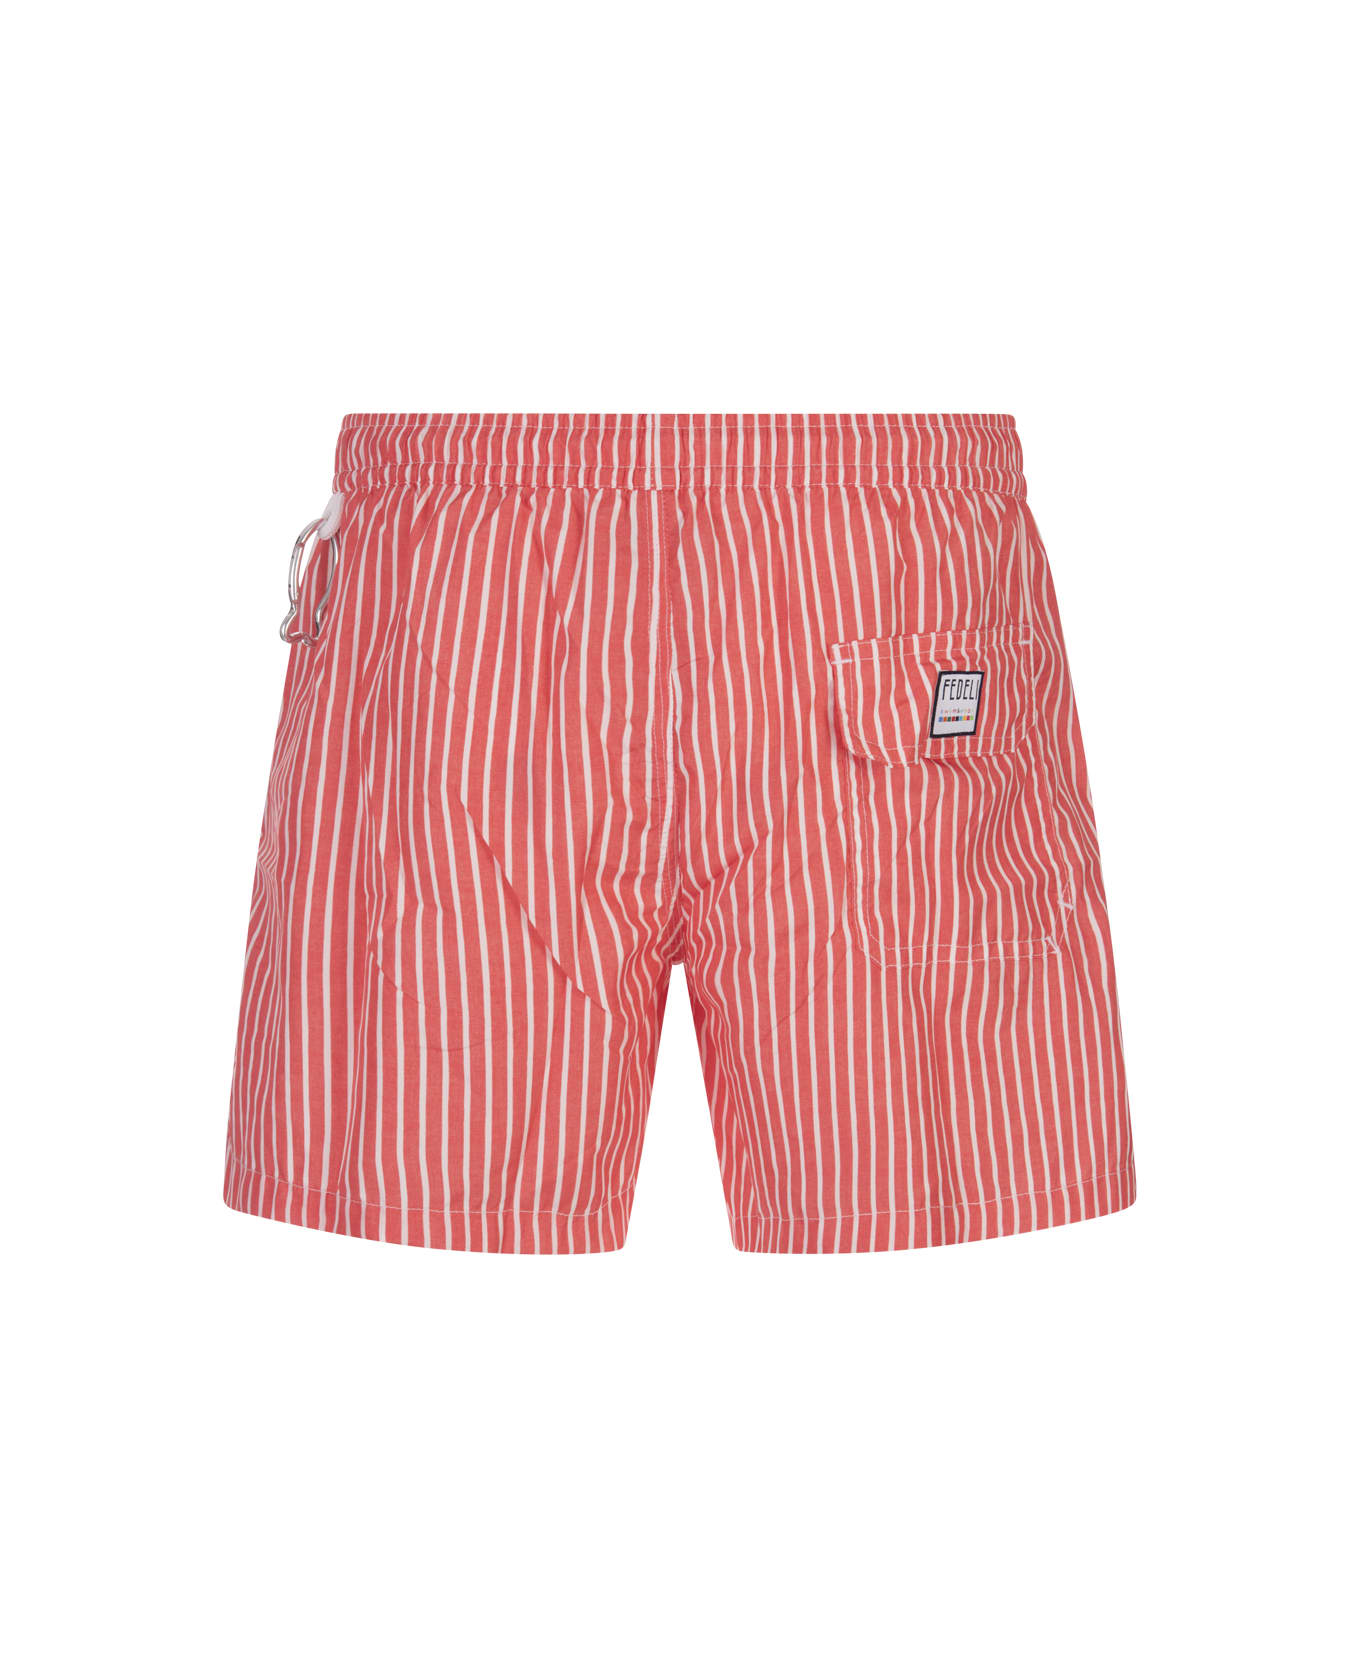 Fedeli Red And White Striped Swim Shorts - Red